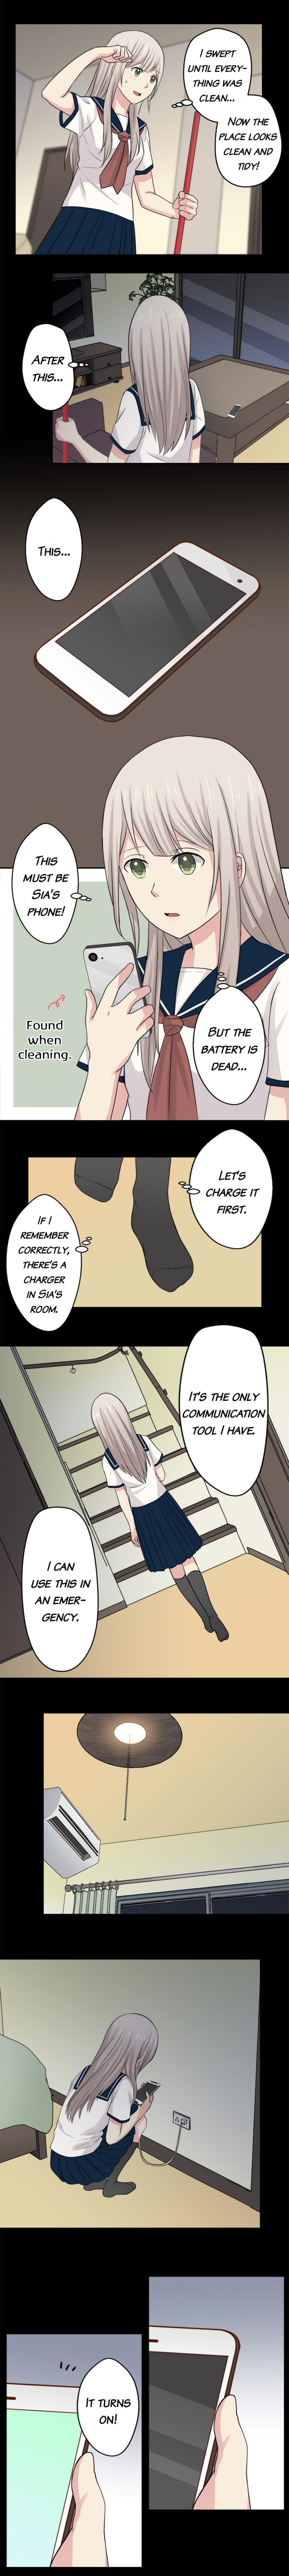 Switched Girls - Page 2